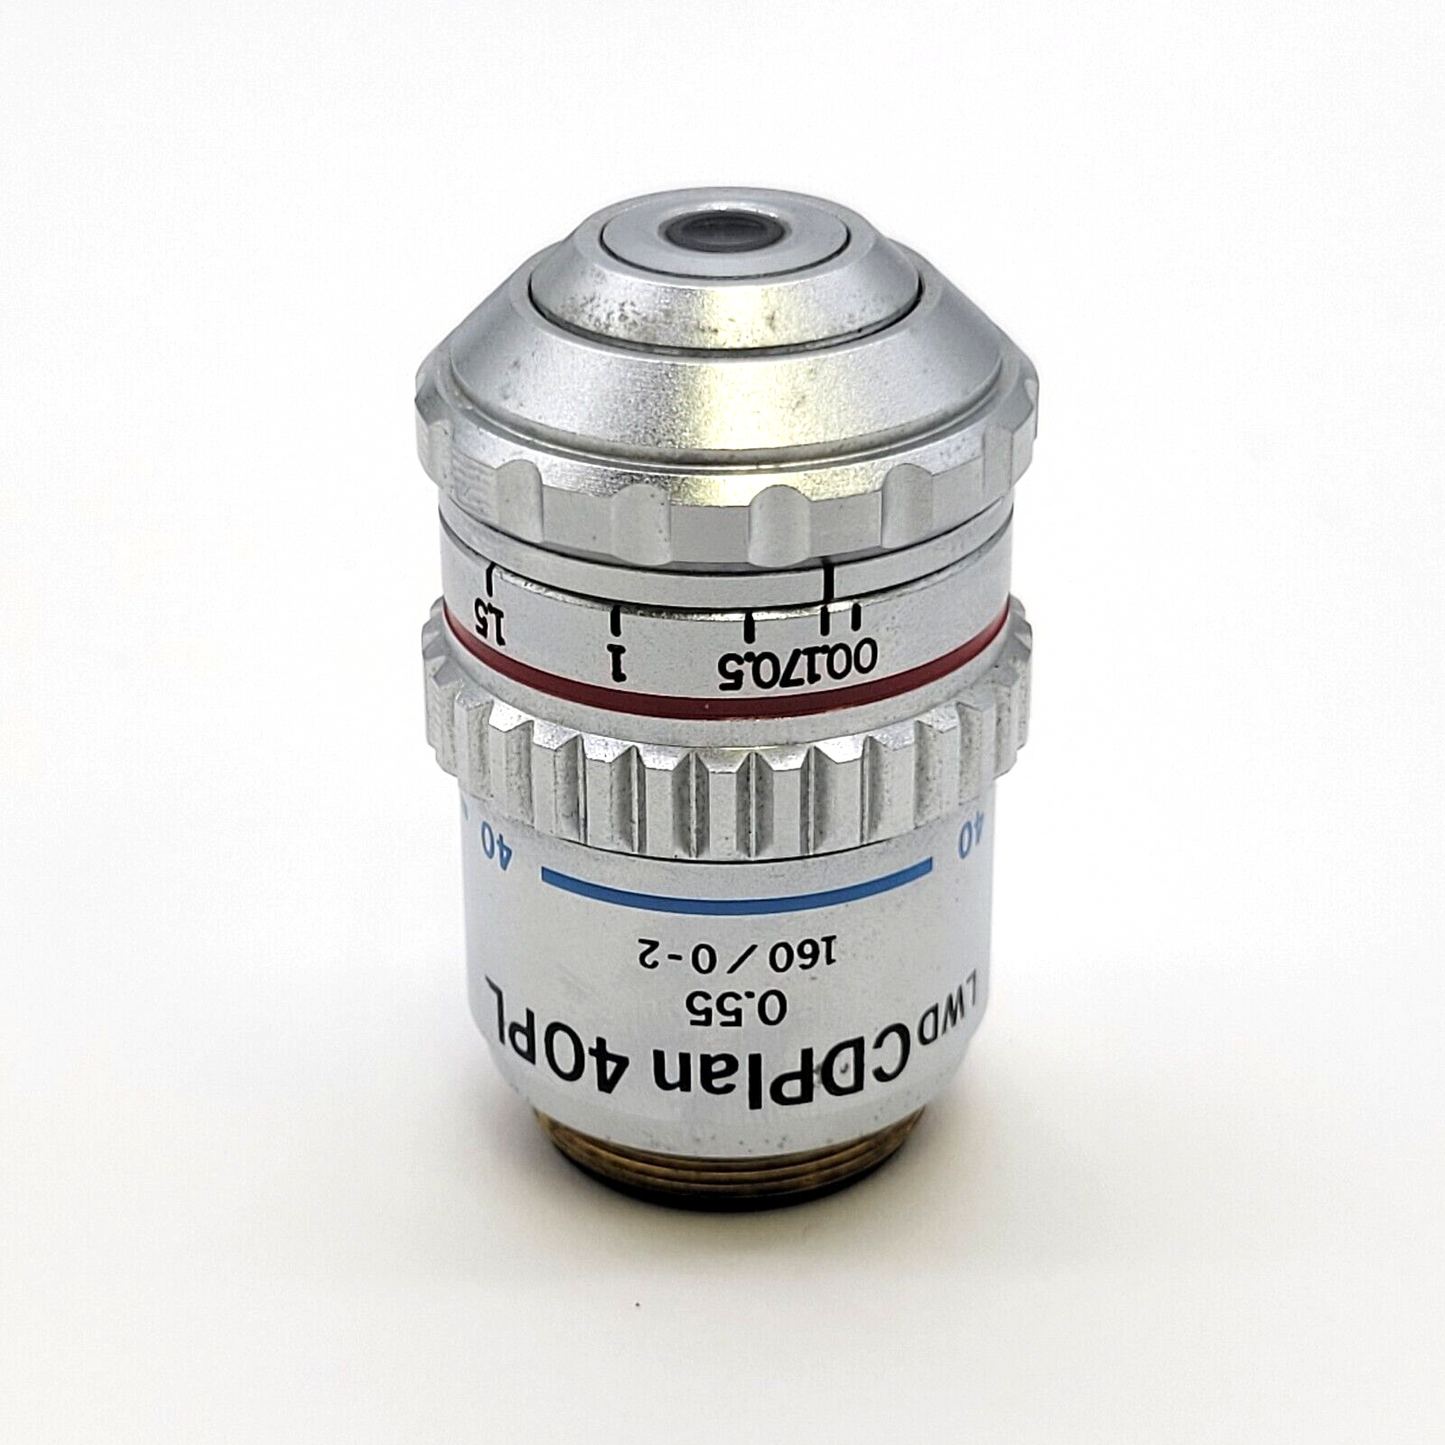 Olympus Microscope Objective LWD CDPlan 40x 40PL Phase Contrast 160/0-2 - microscopemarketplace